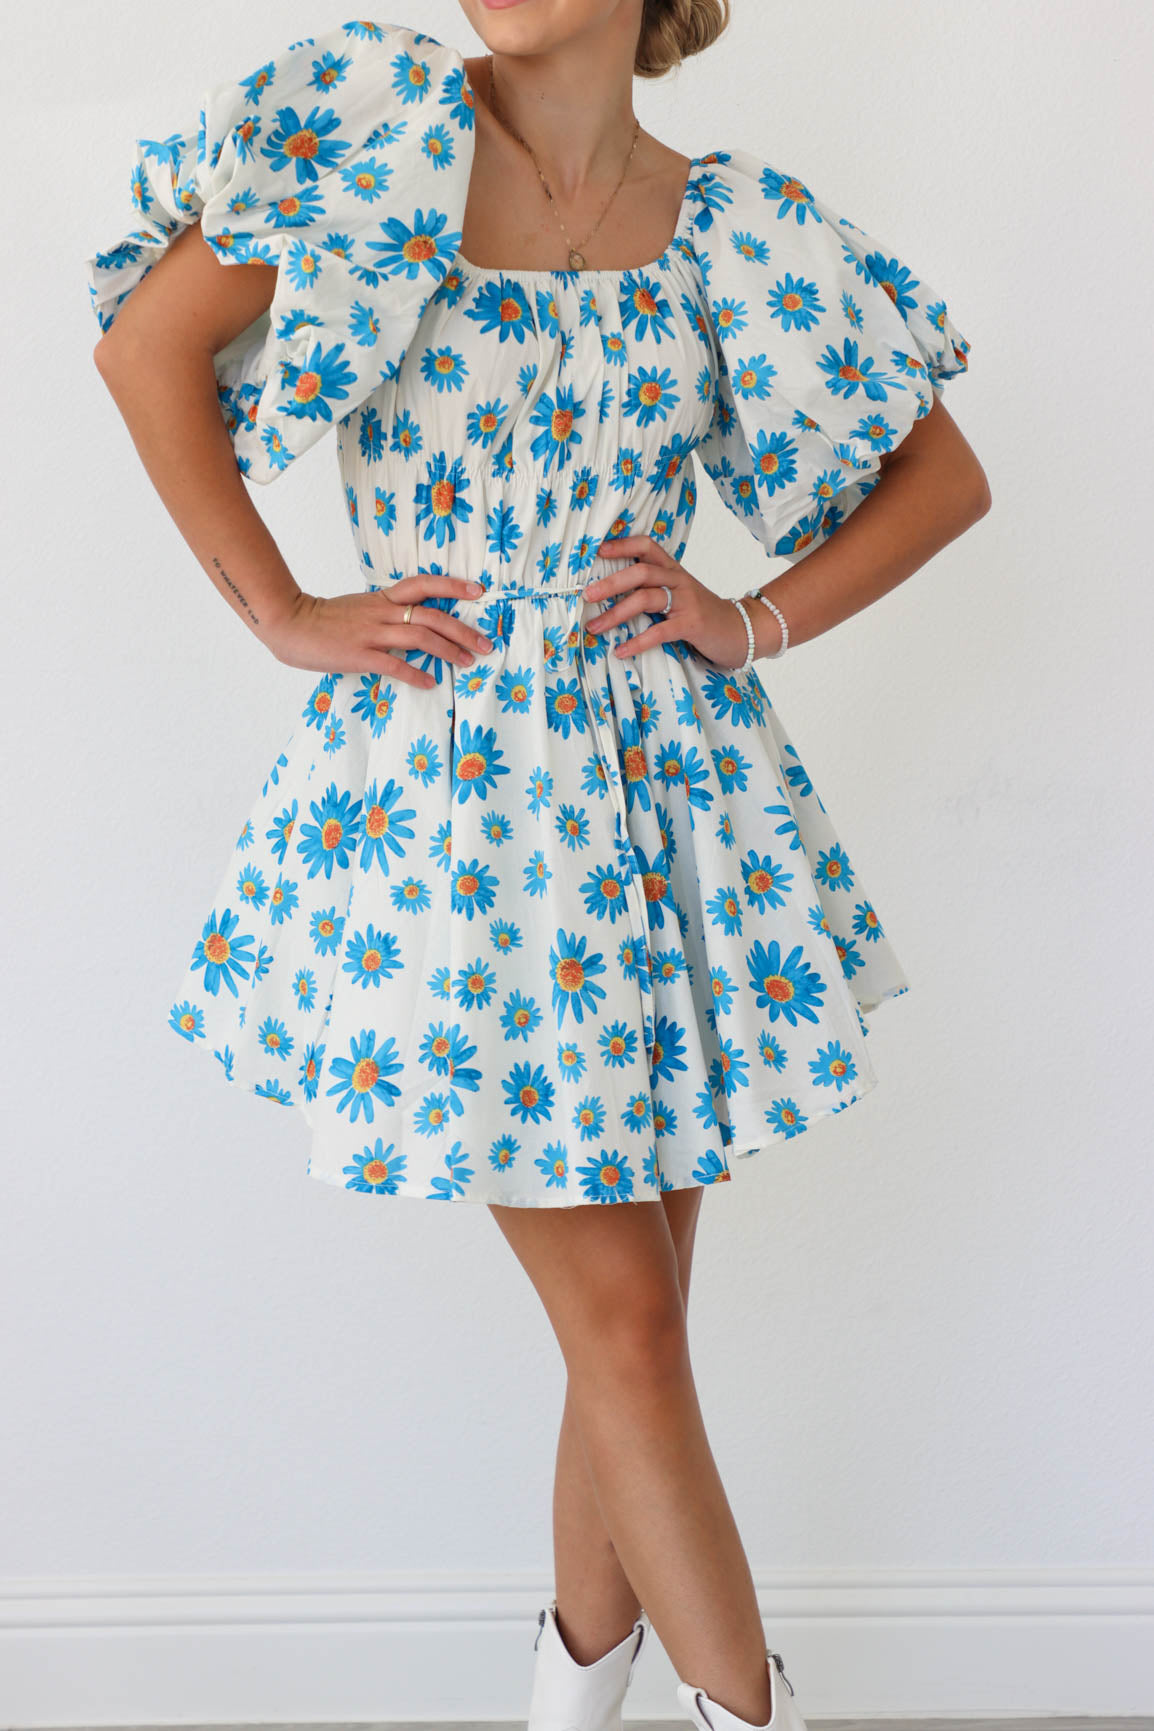 girl wearing white puff sleeved dress with blue florals 